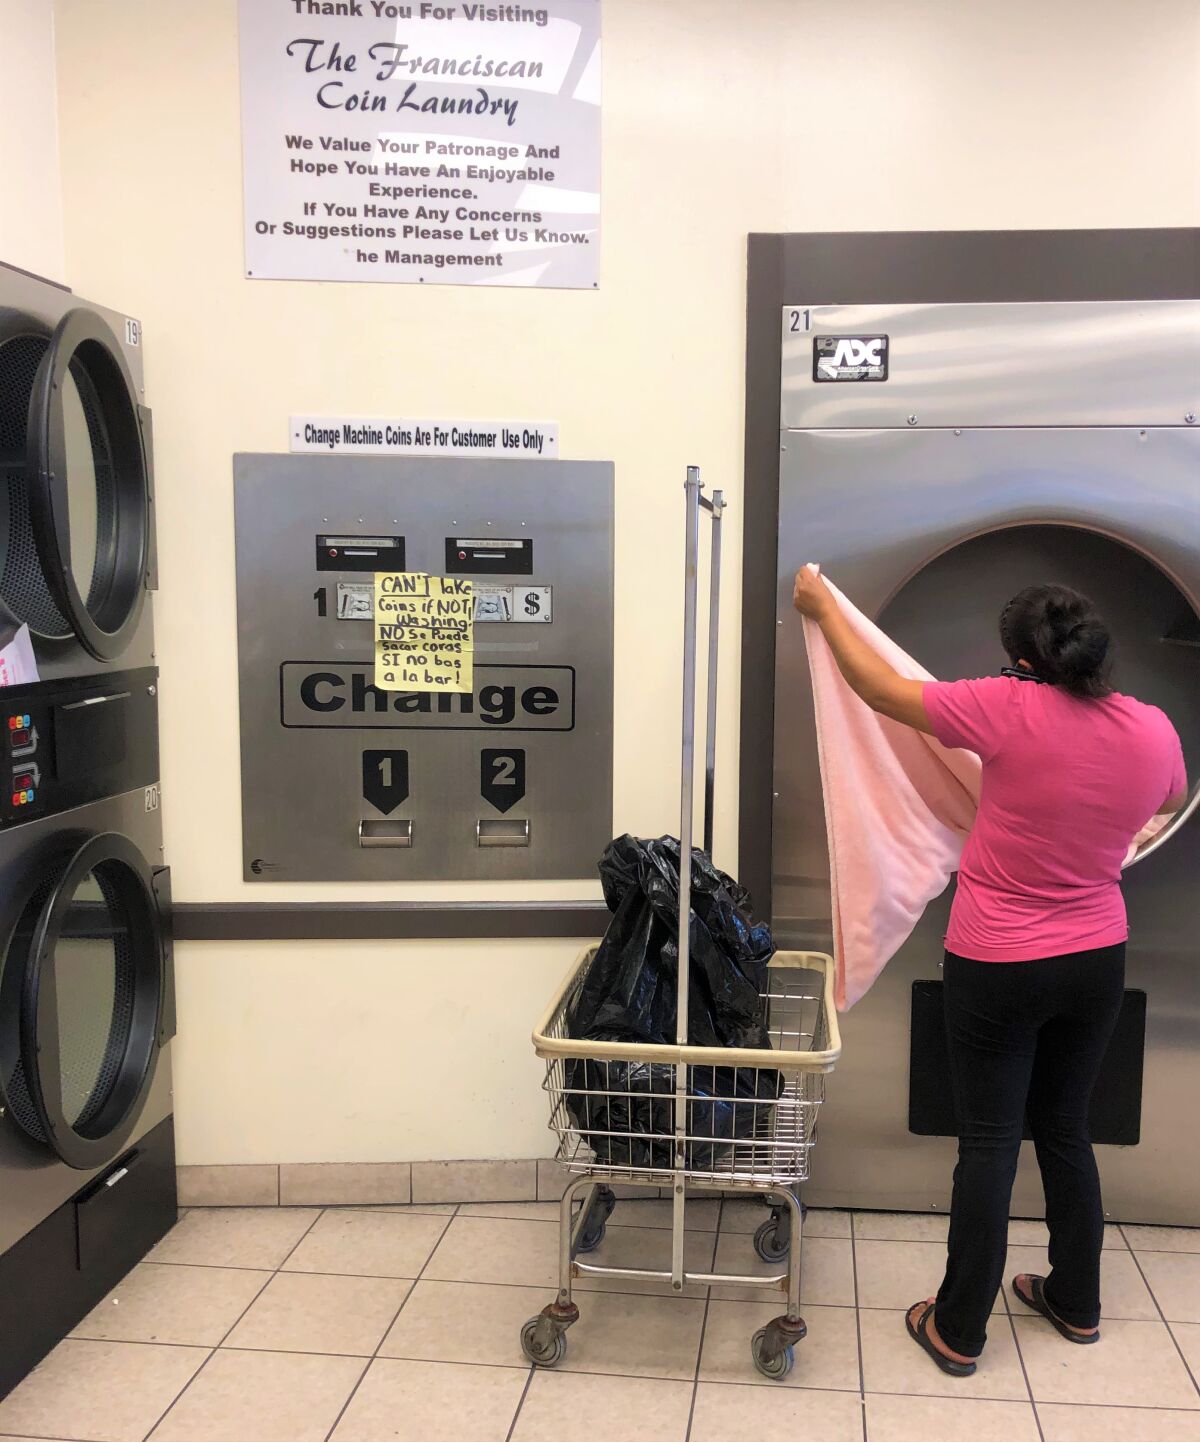 Customer folds laundry at The Franciscan Coin Laundry in Vista